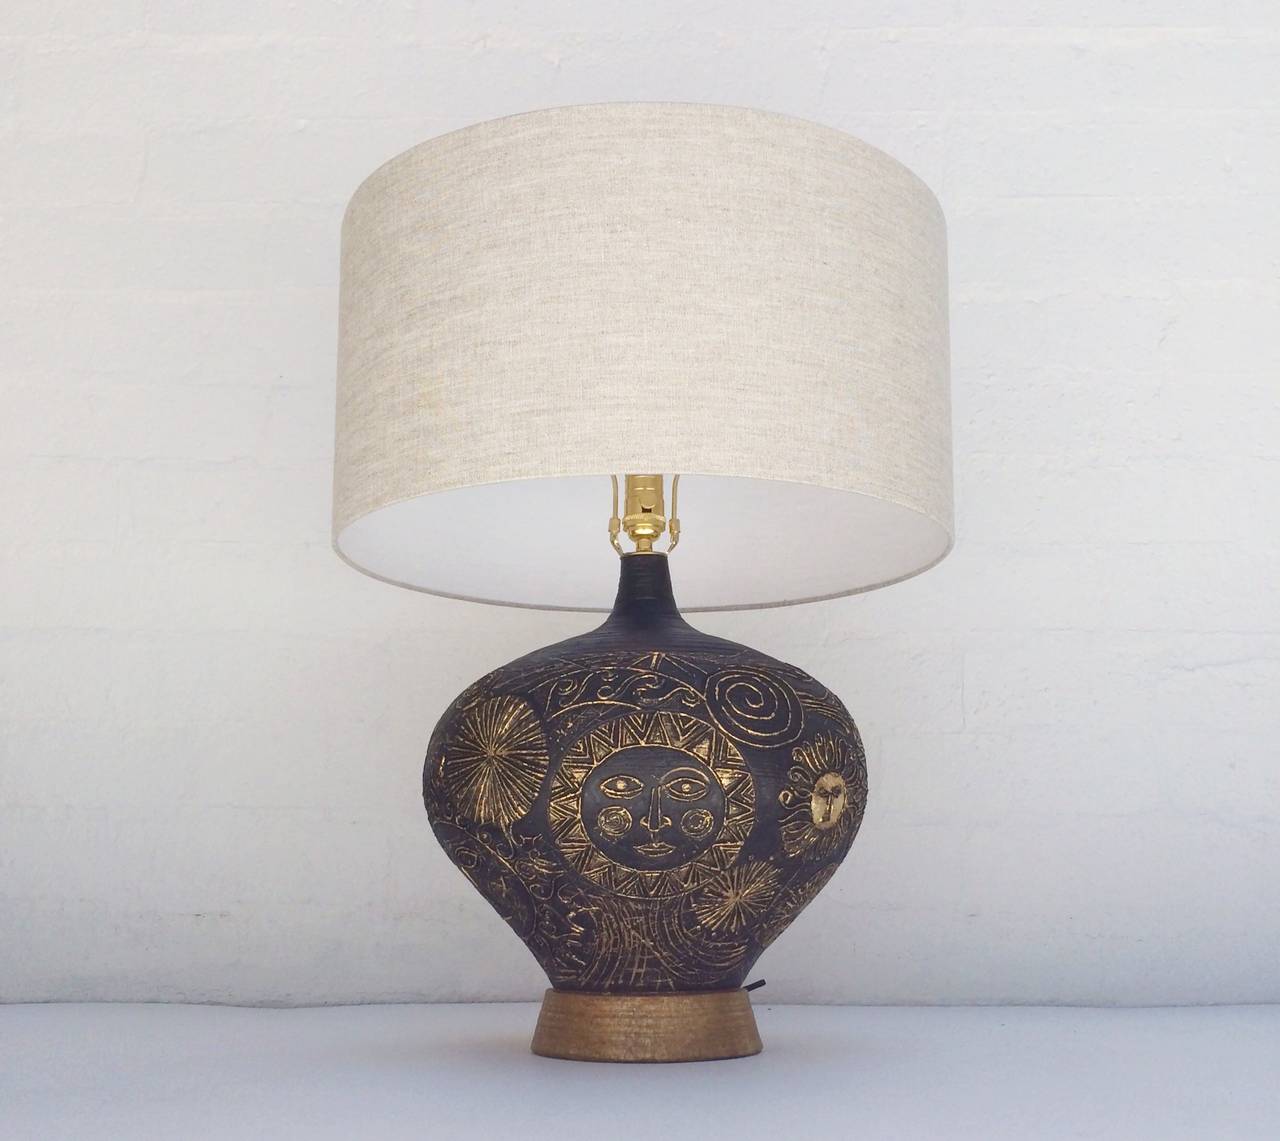 A 1950s plaster table lamp hand-painted black with gold leaf.
This lamp has sun face images.
All new brass hardware and newly rewired.
New oatmeal linen shade.